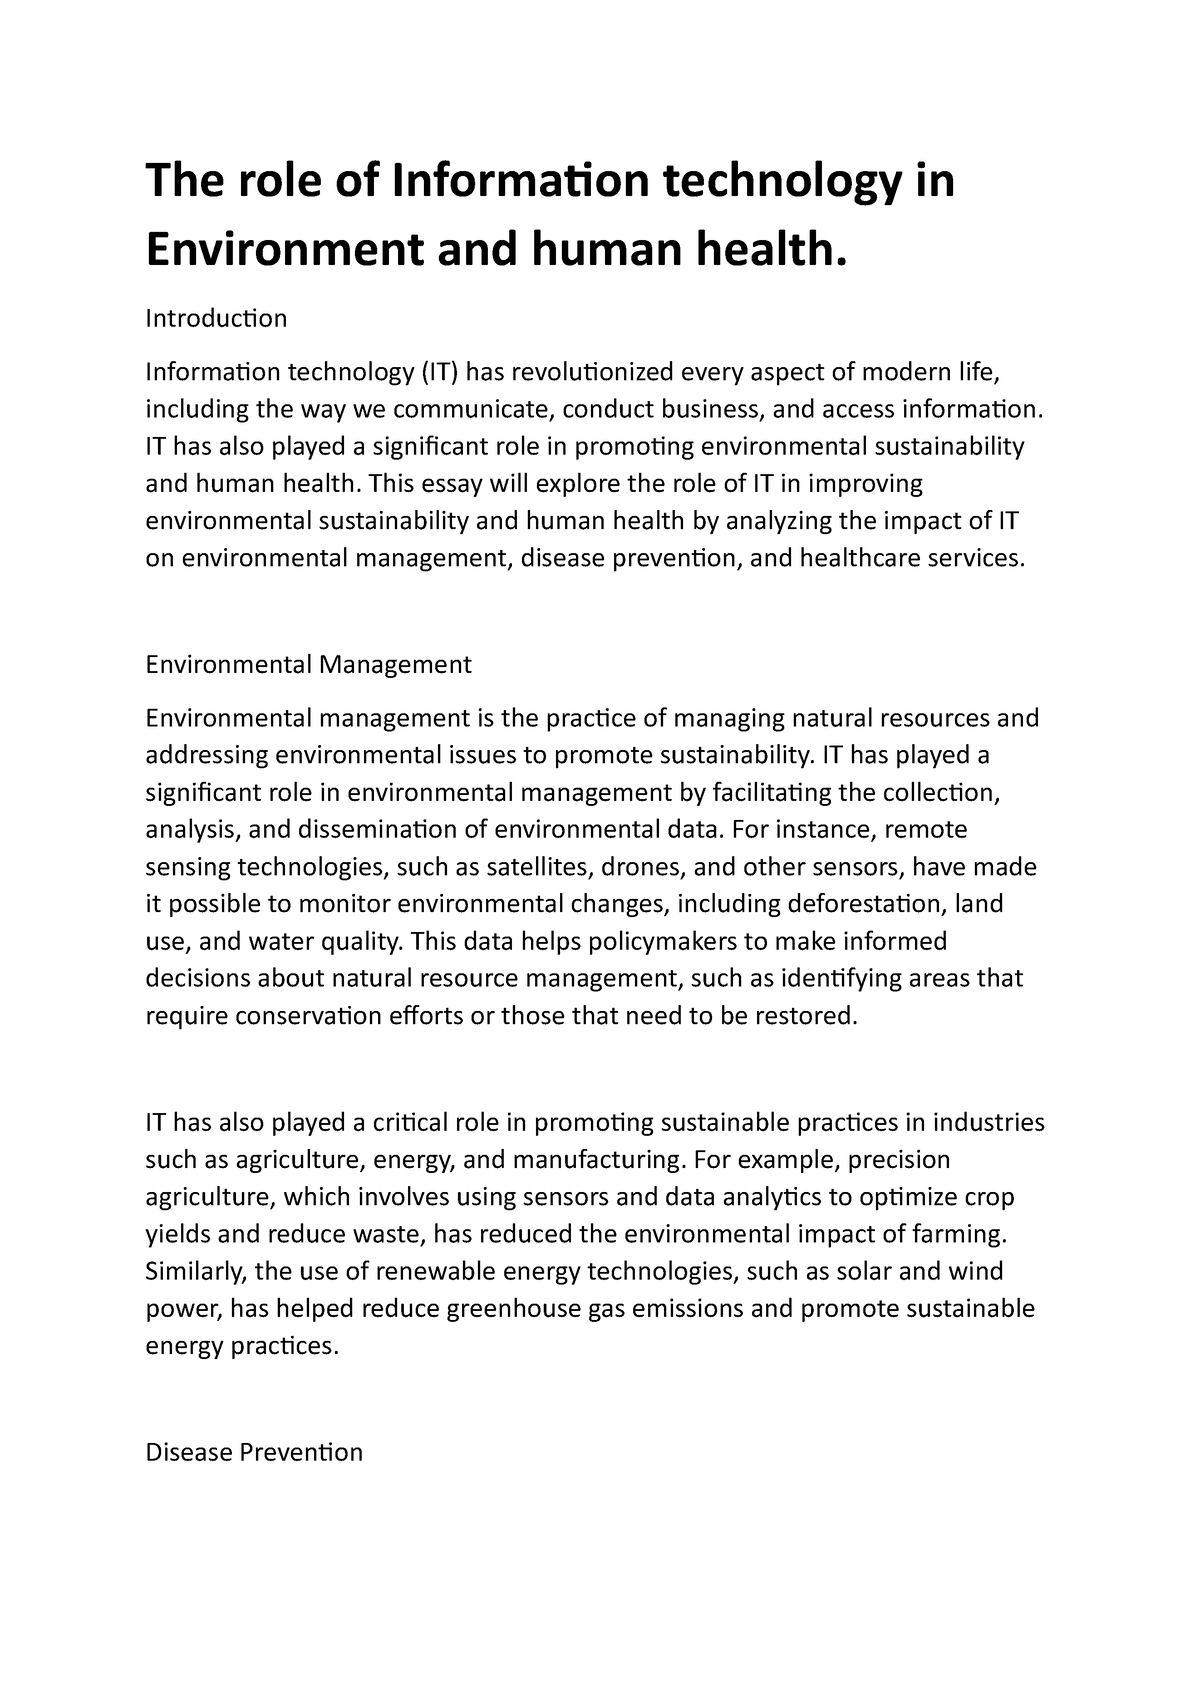 role of information technology in environment and human health essay